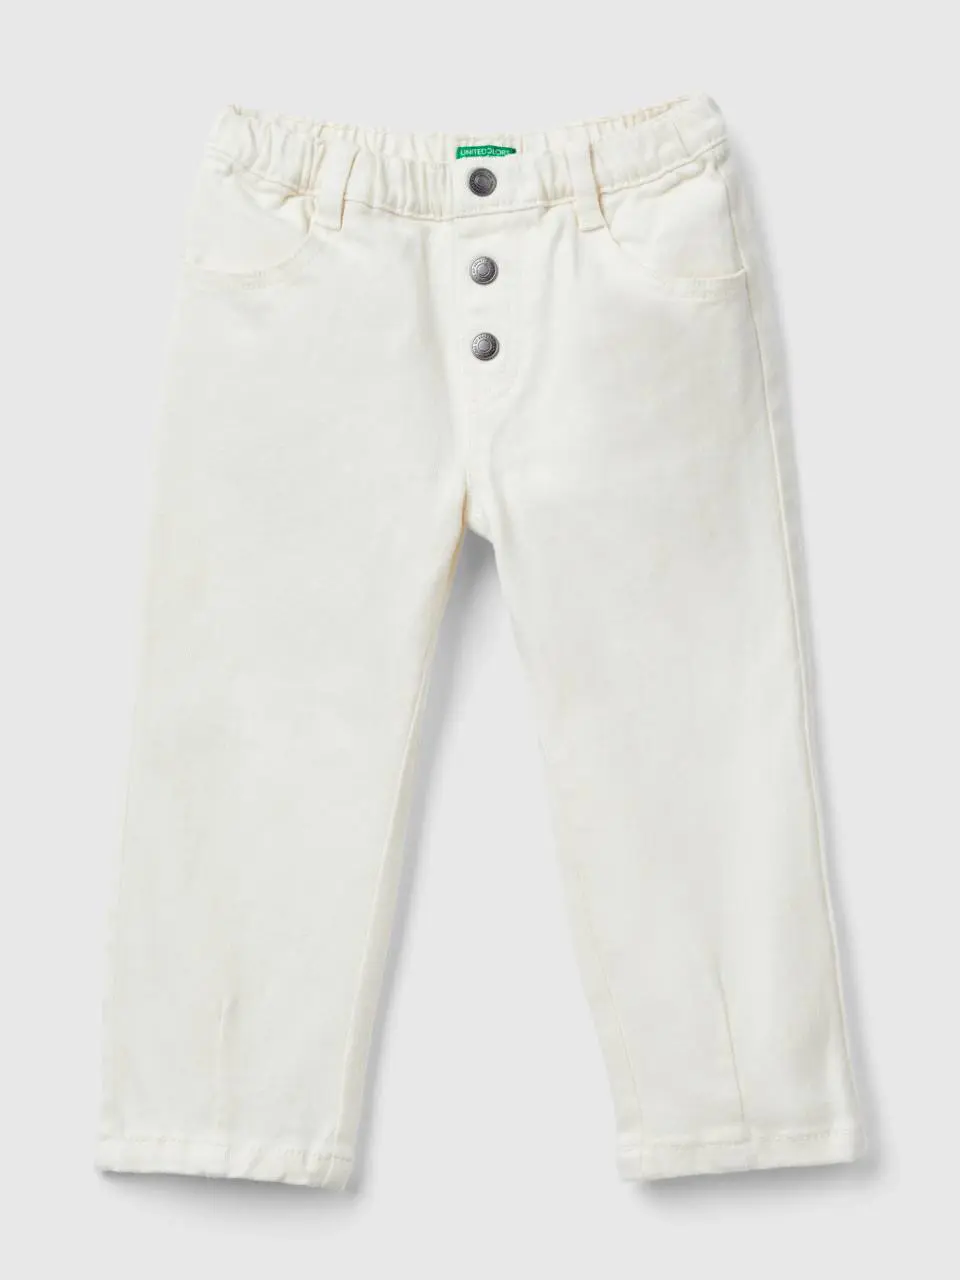 Benetton baggy fit trousers. 1